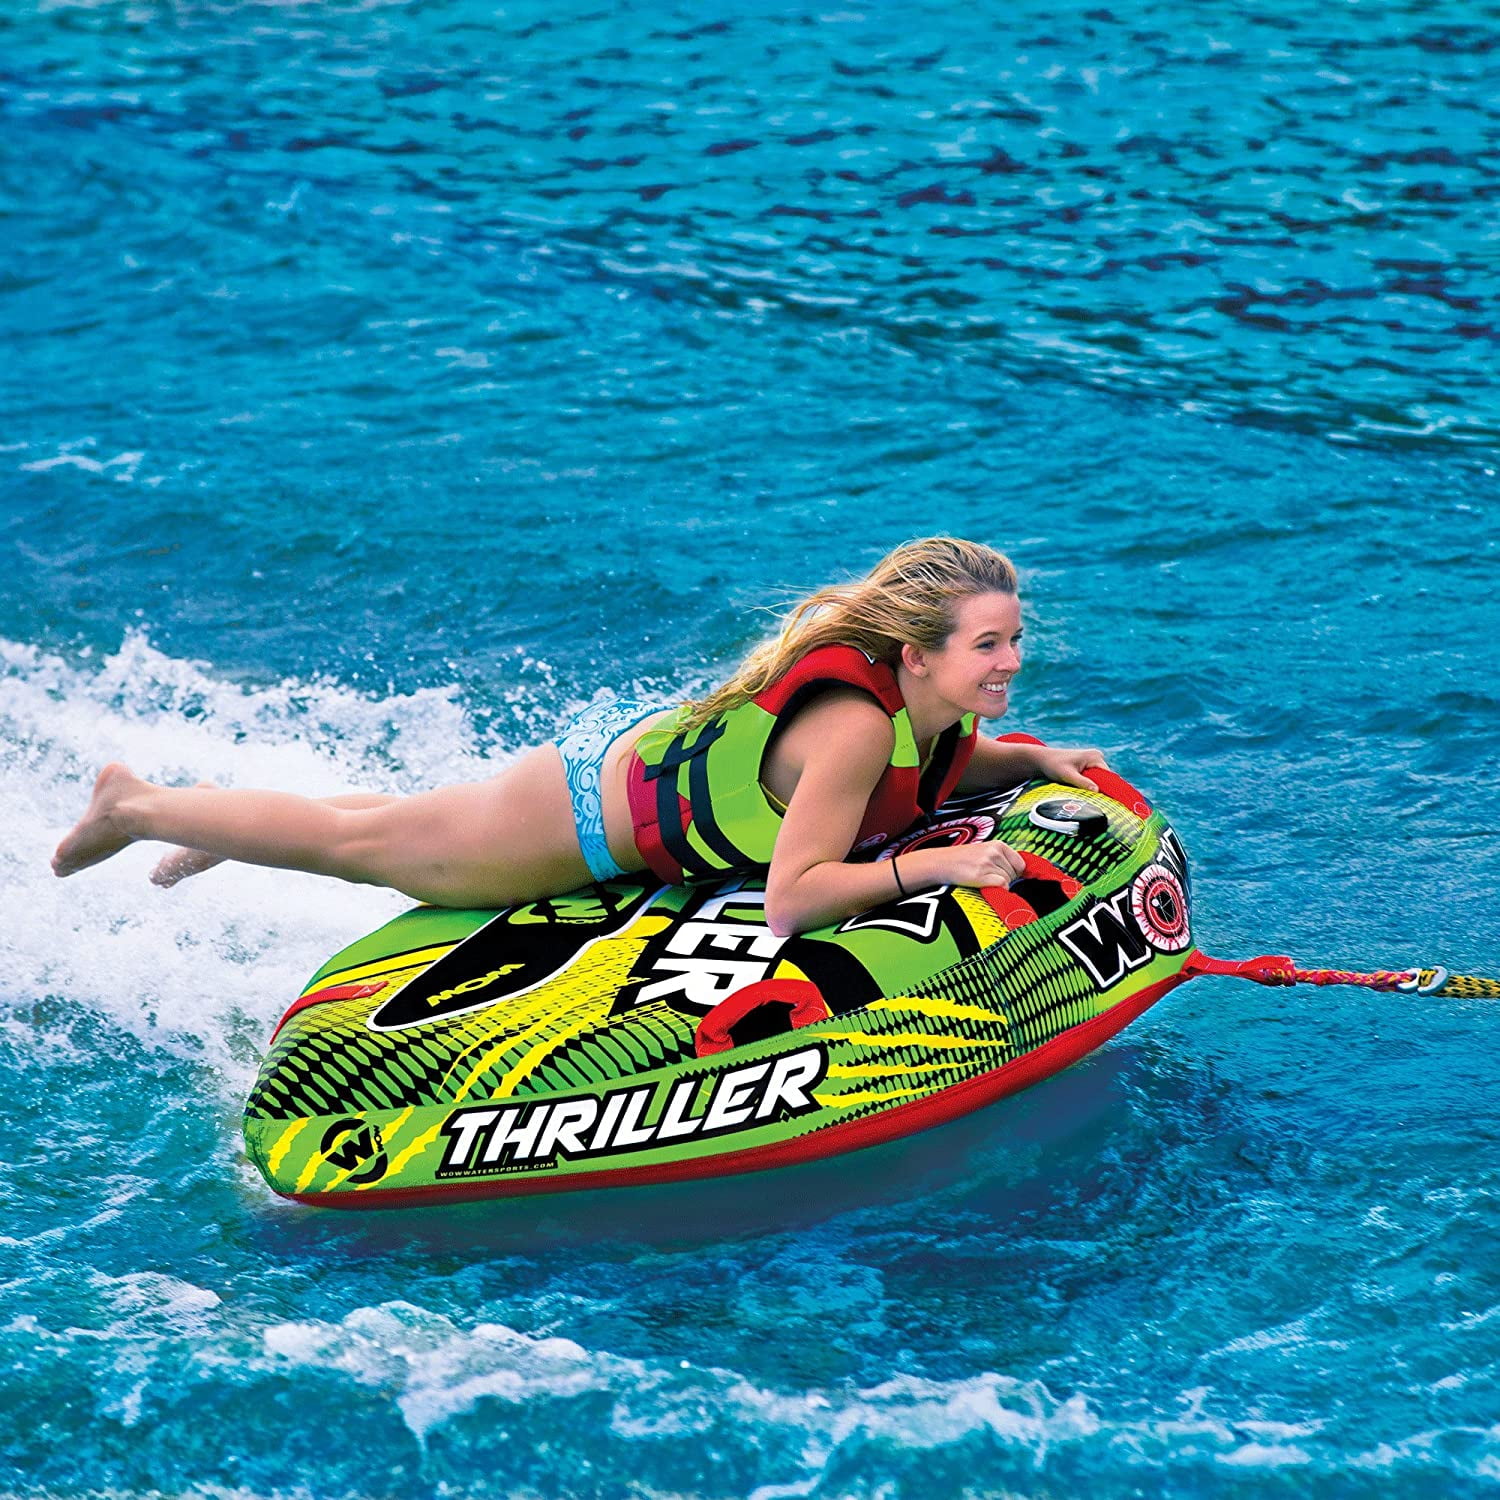 Wild Wake THRILLER Watersports Inflatable Water Tube Deck Boat Towable 